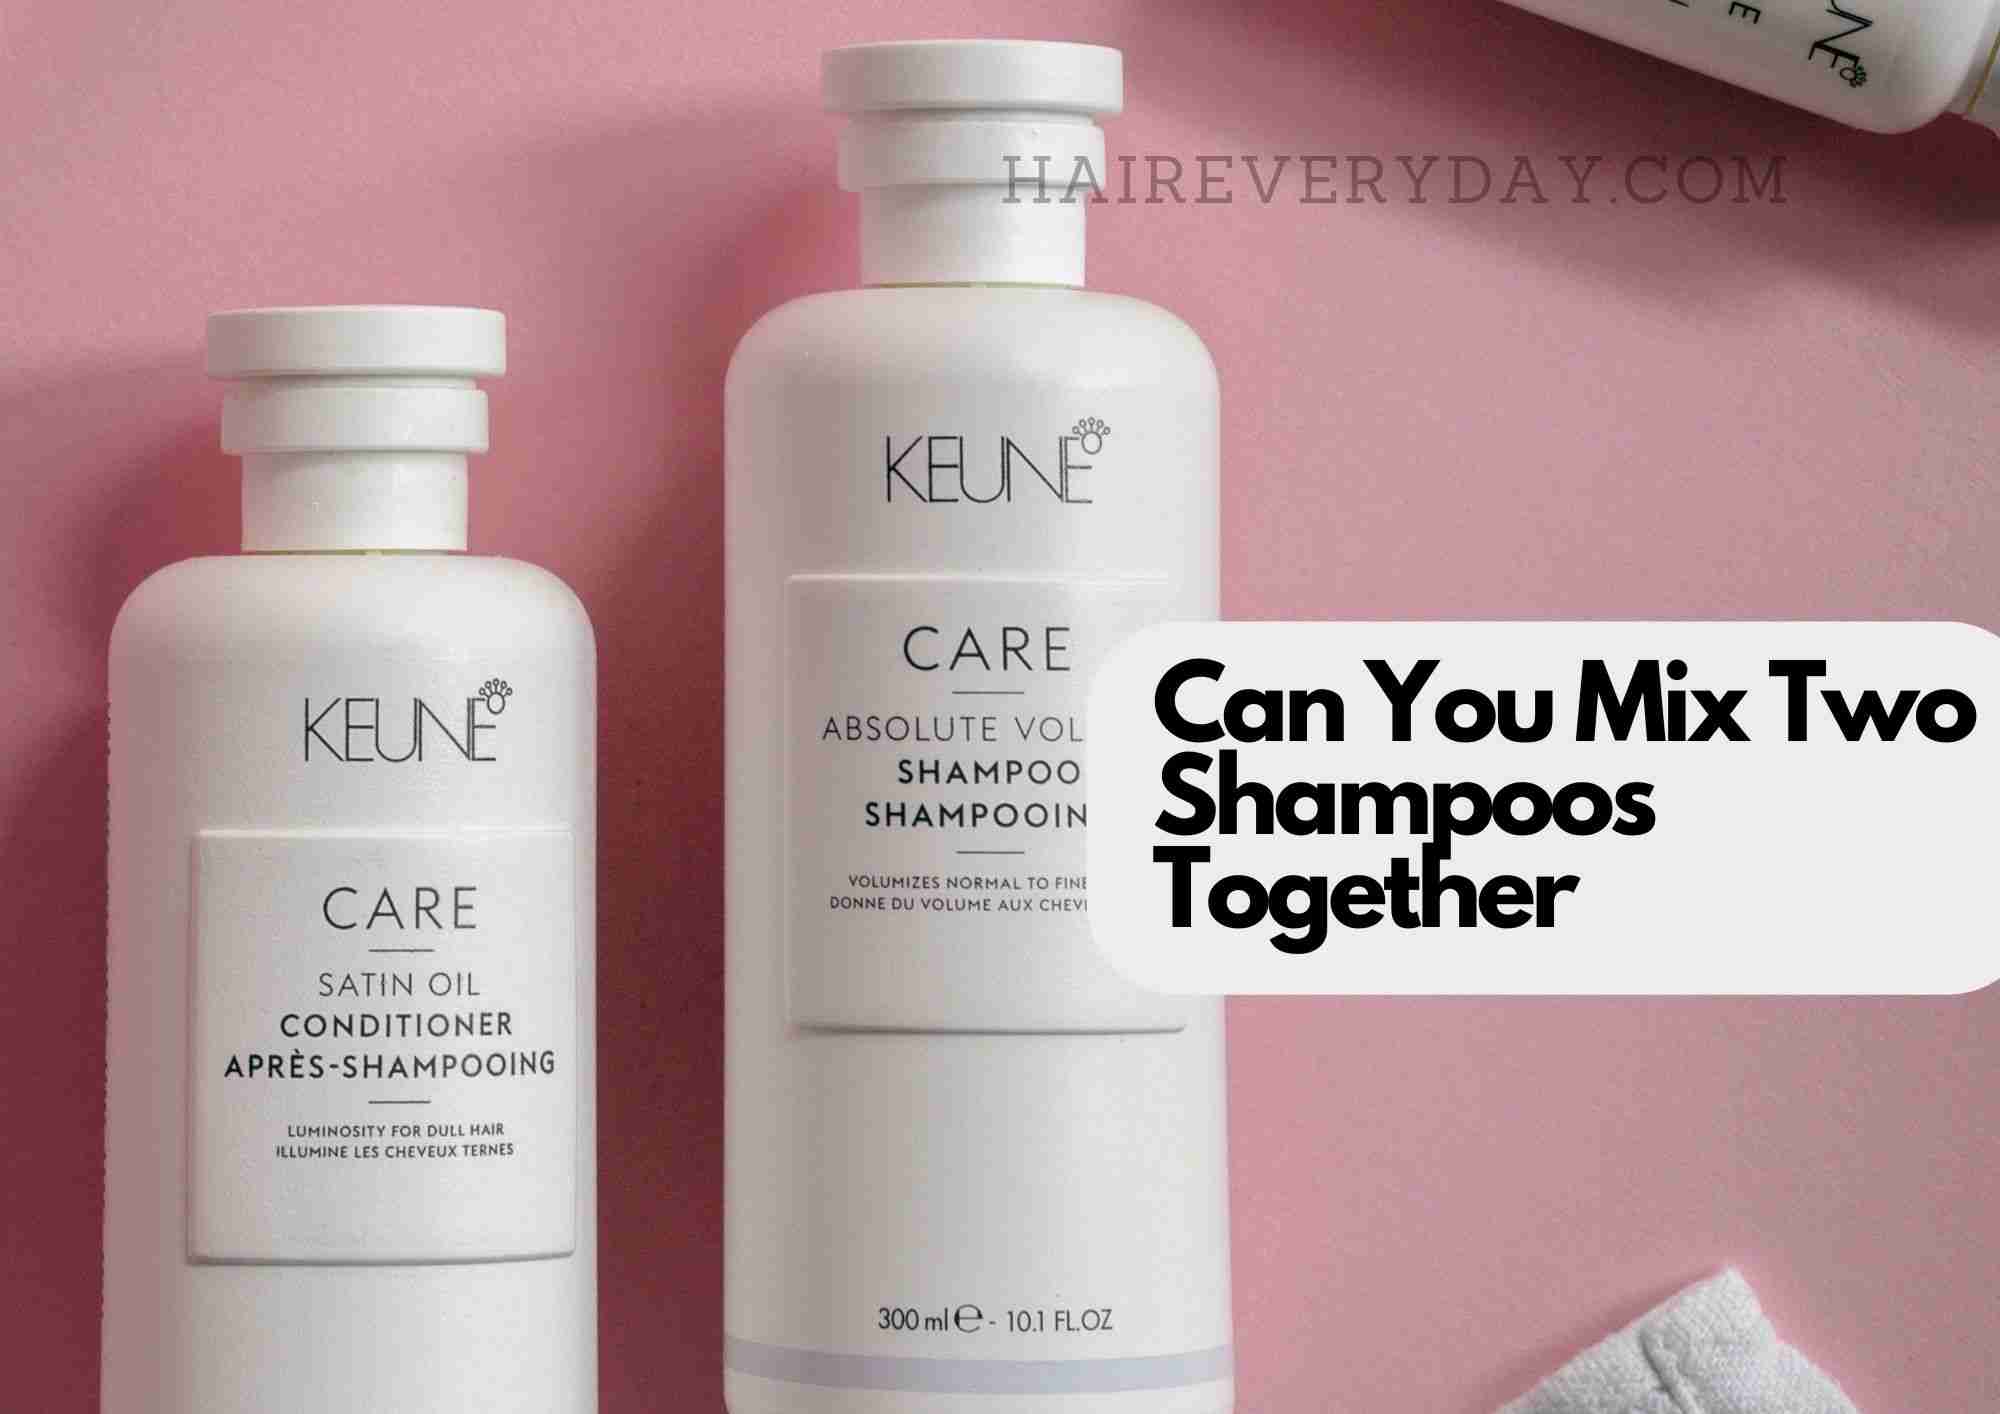 metan TRUE deltage Can I Mix Two Shampoos Together | Awesome Benefits, Side Effects Of Mixing  Products! - Hair Everyday Review